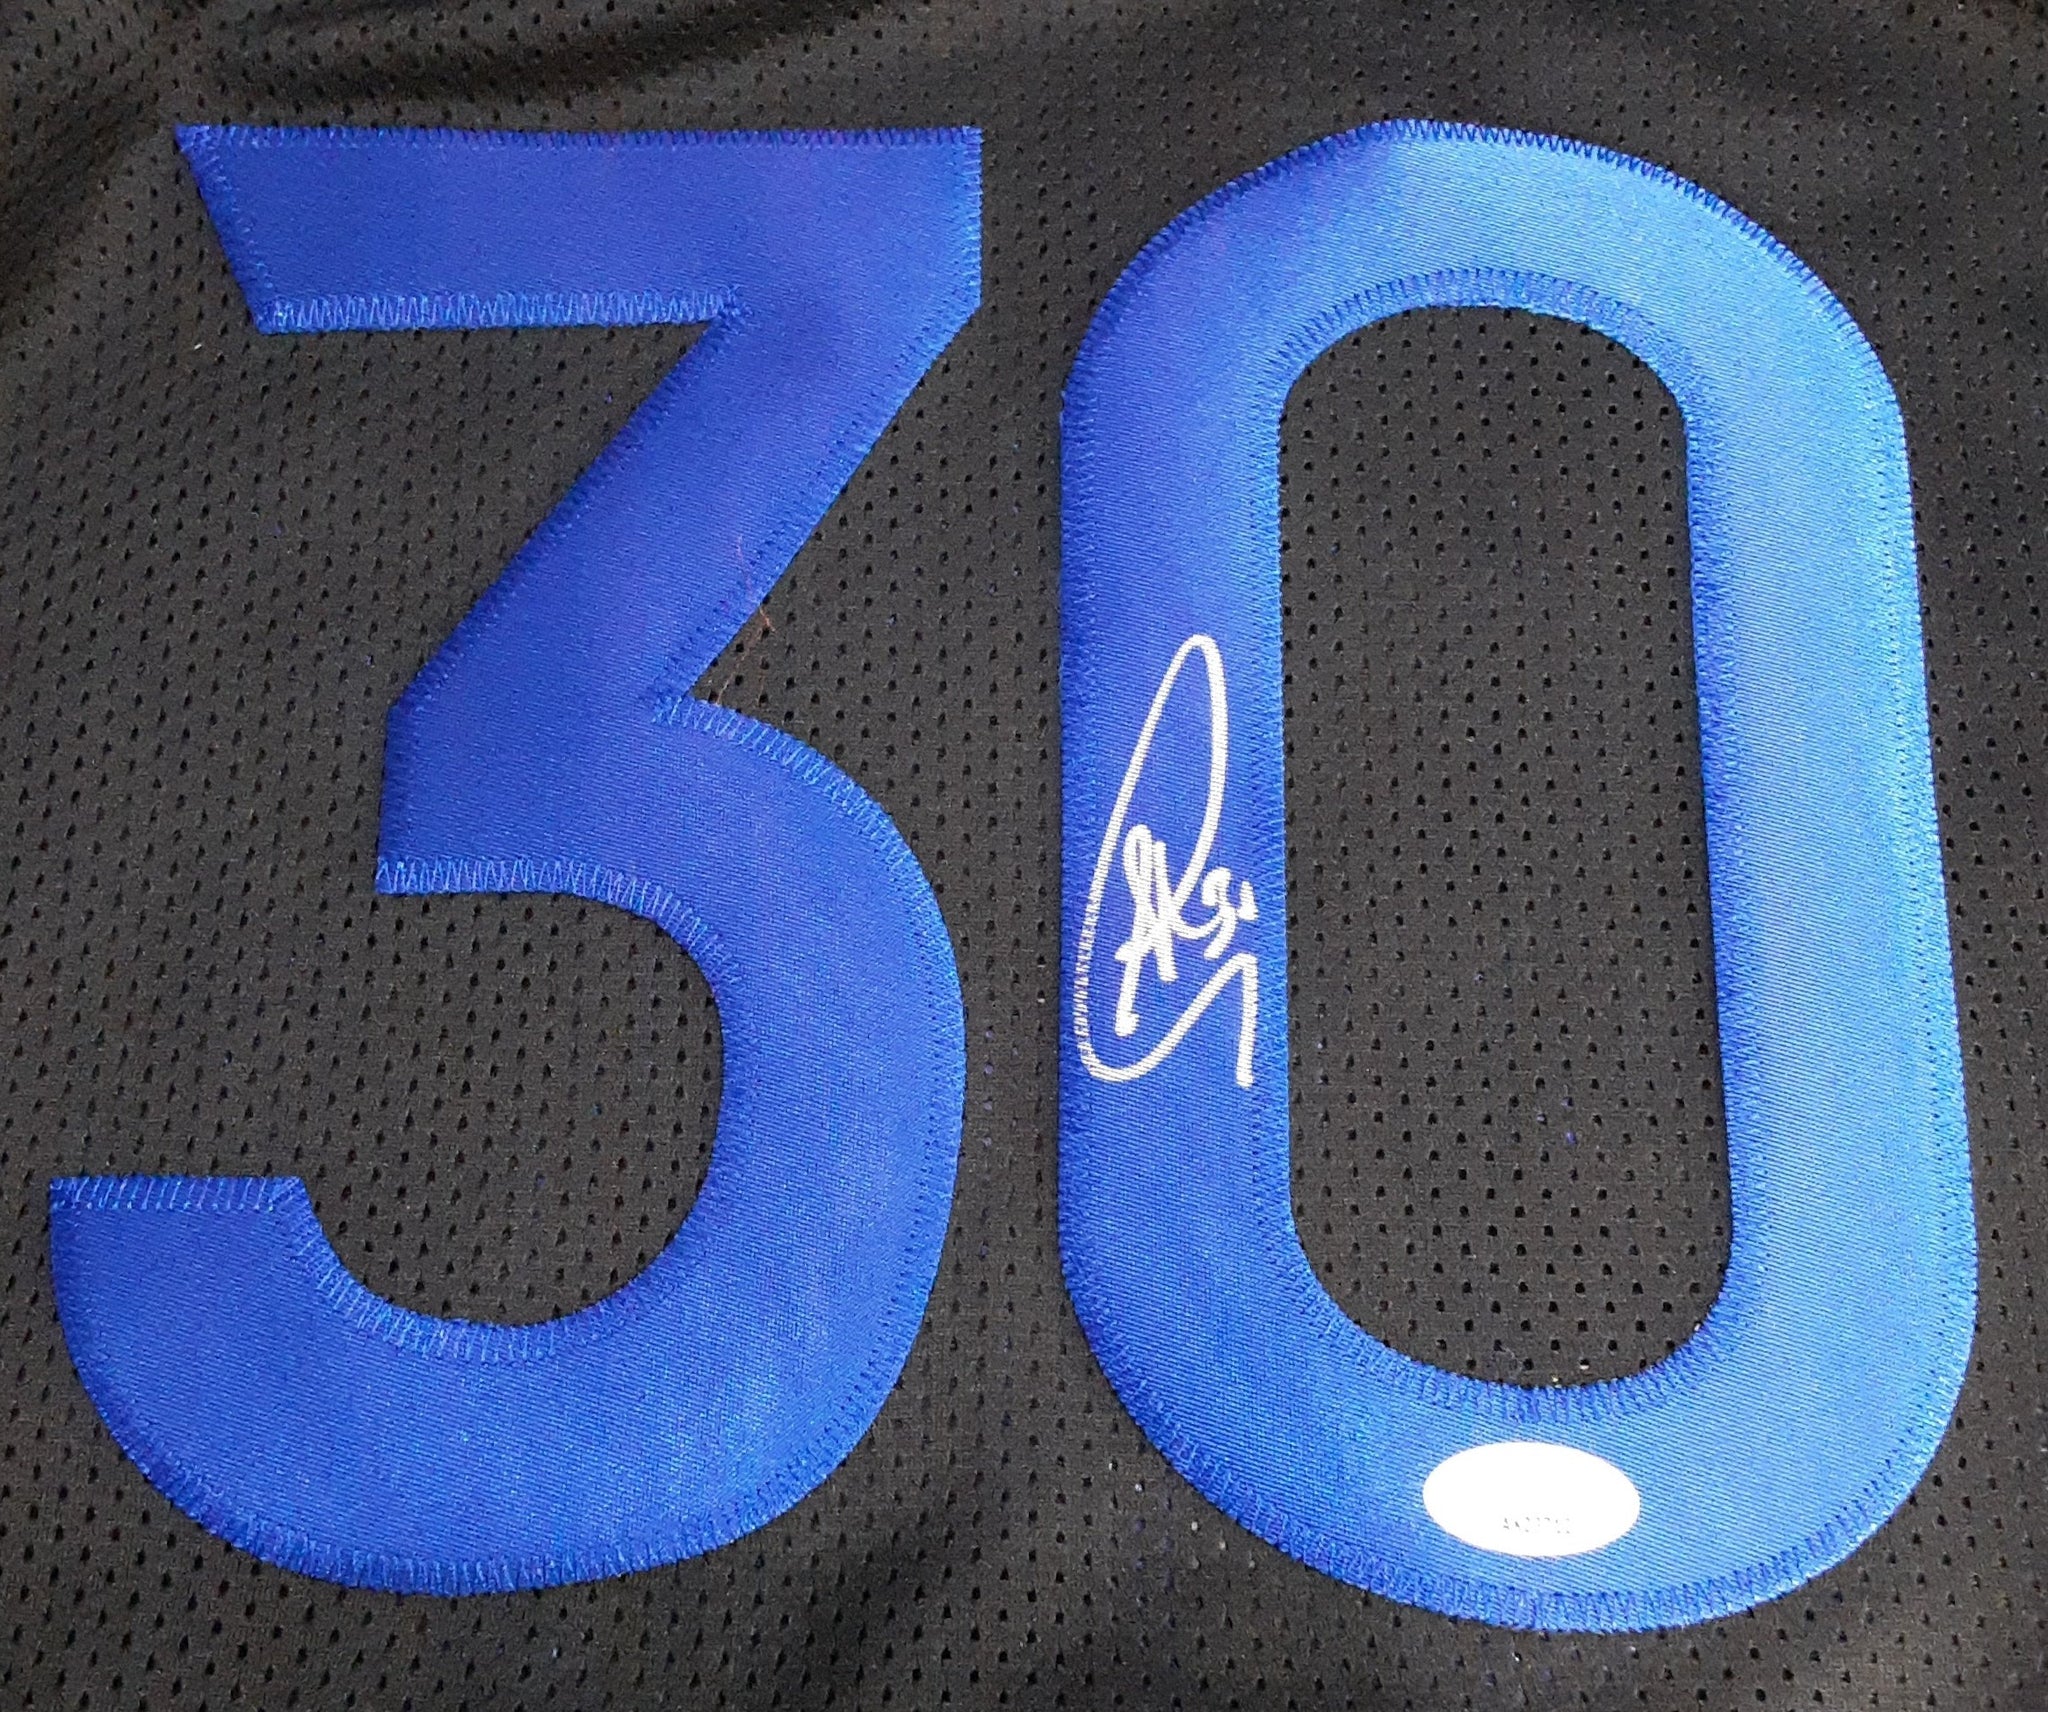 Stephen Curry Authentic Signed Pro Style Jersey Autographed JSA